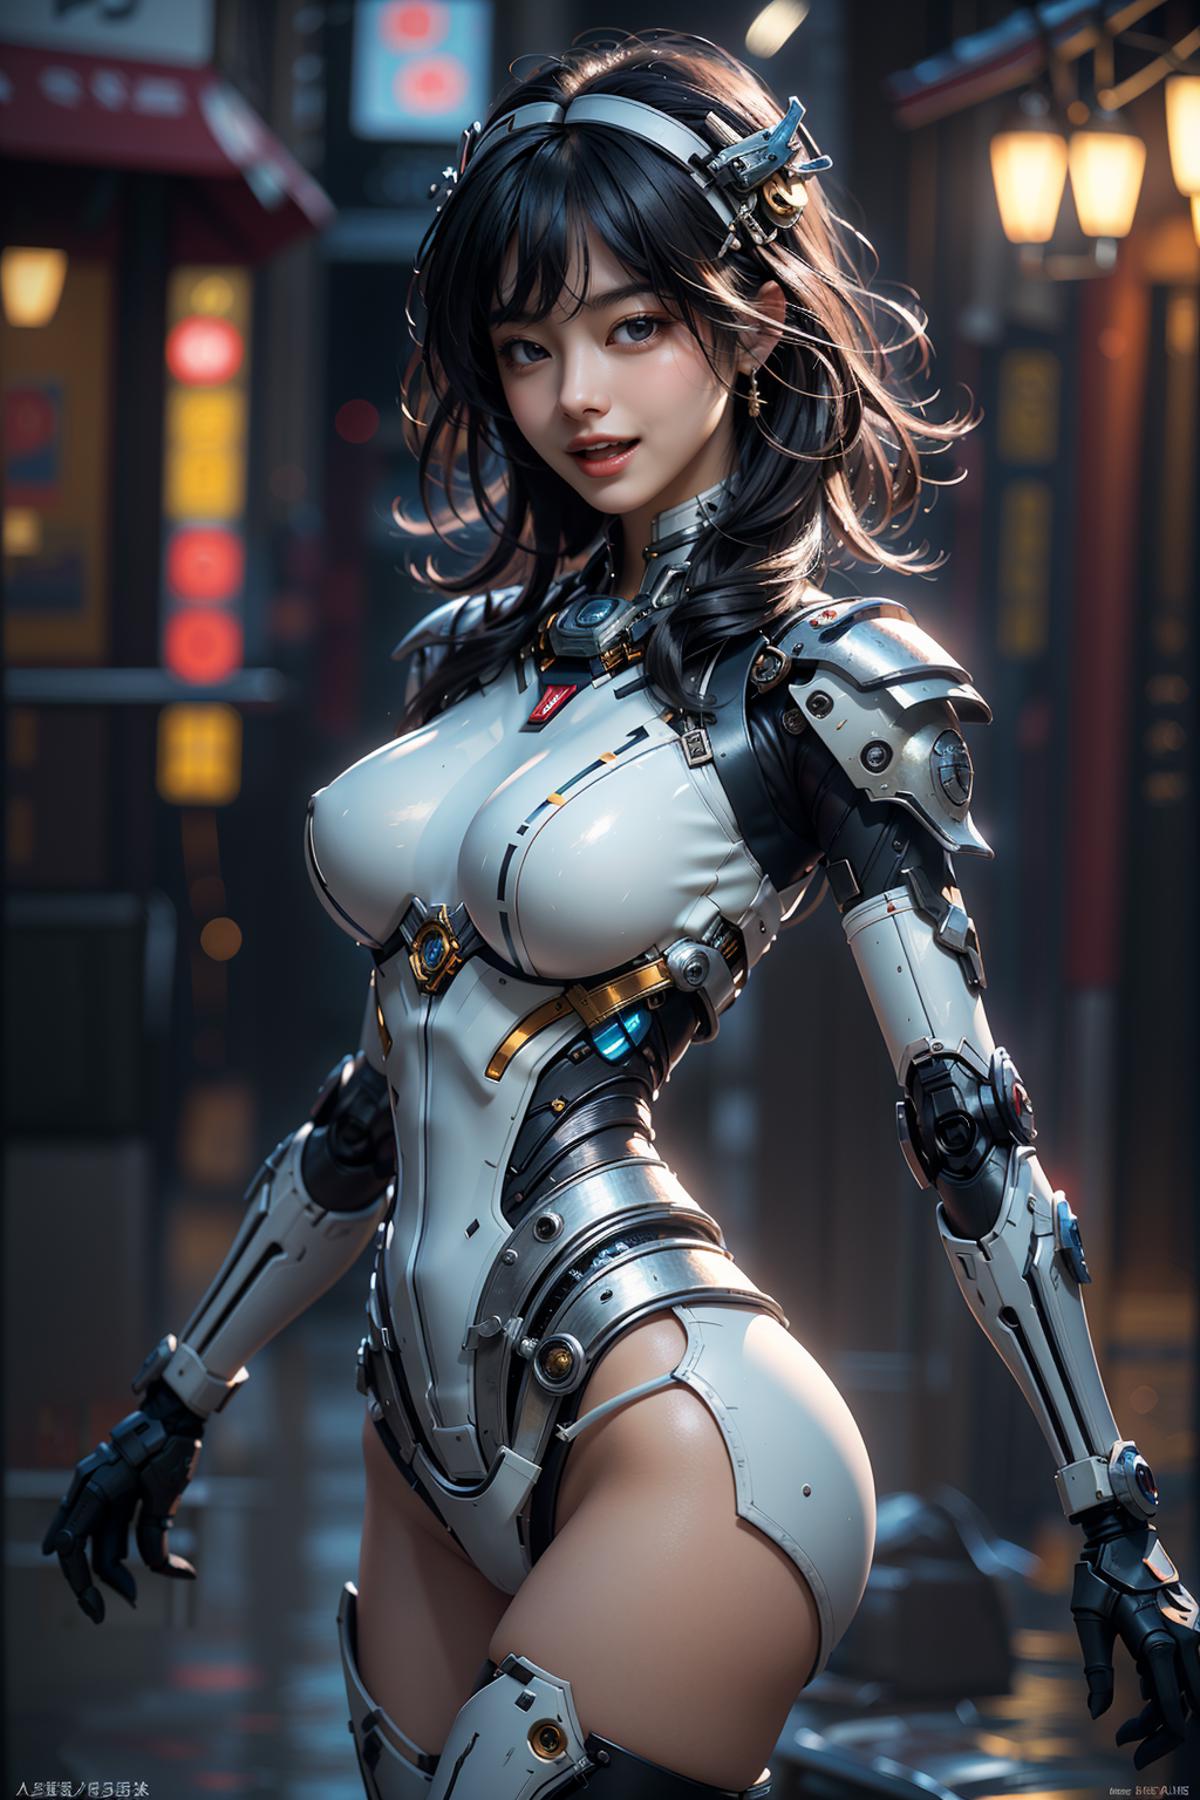 AI model image by pizzagirl